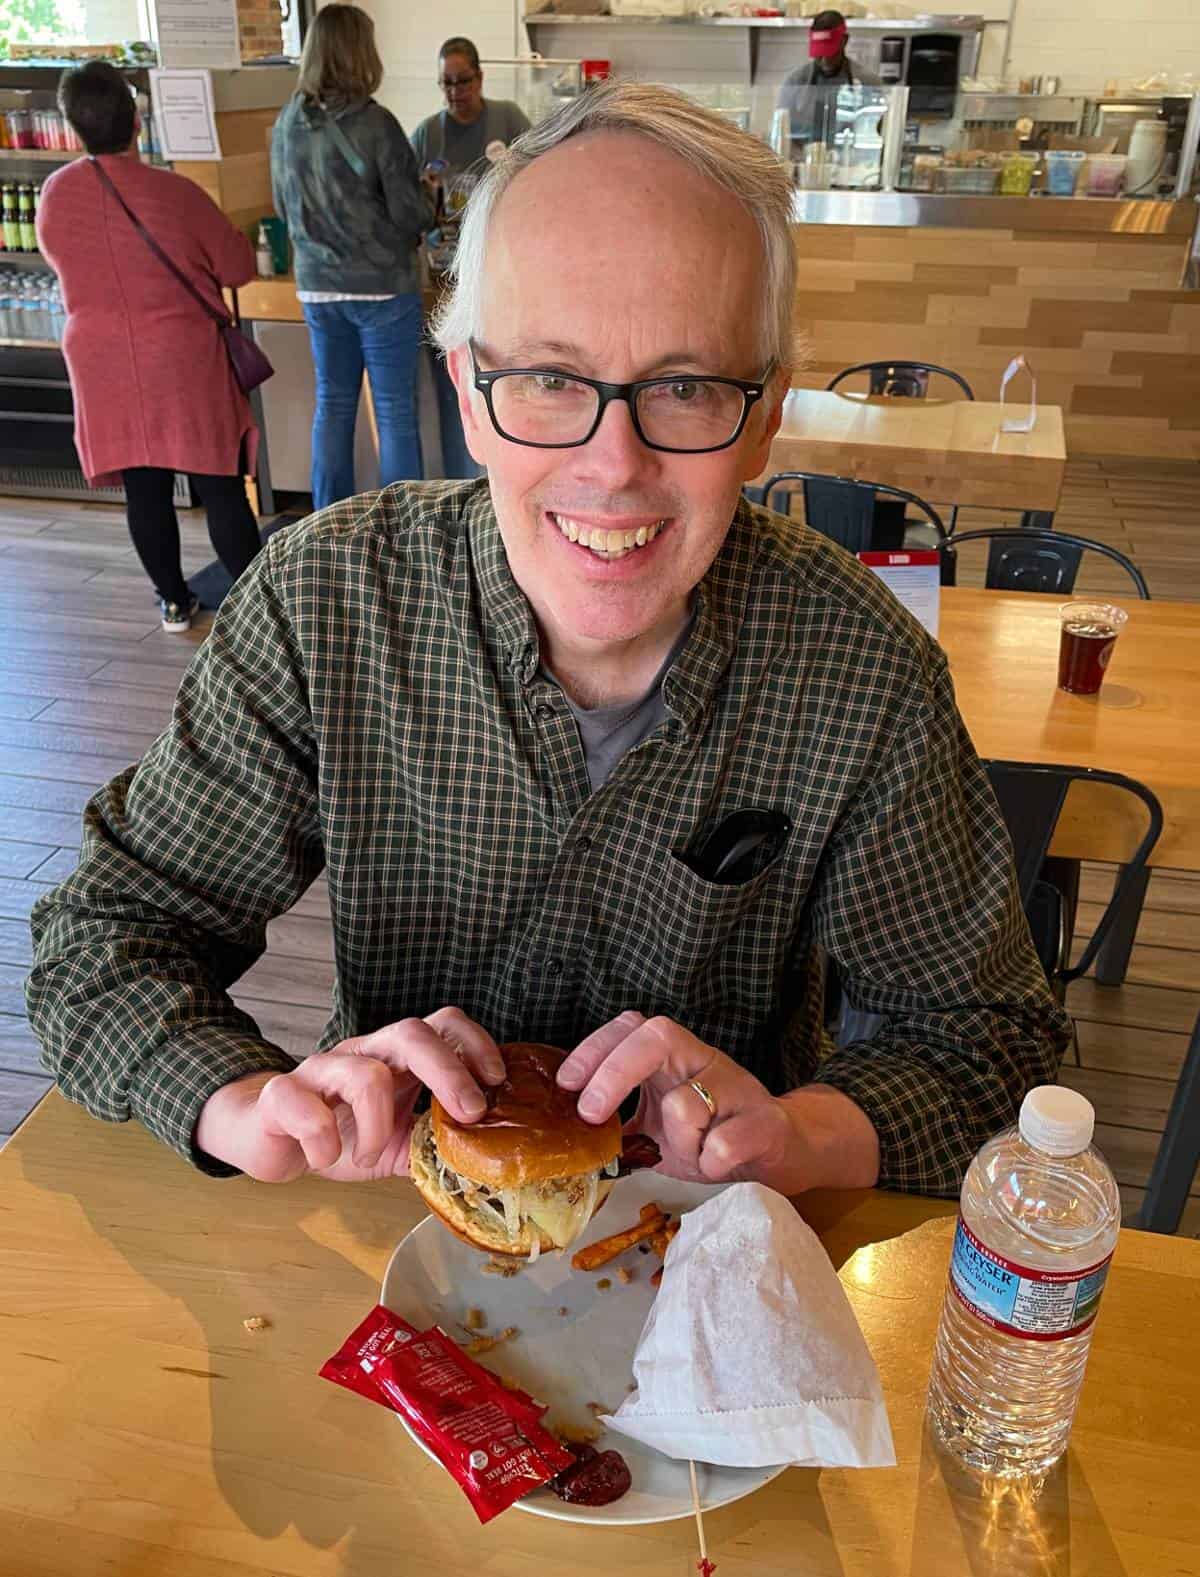 David Crowley, author of Cooking Chat, enjoying a local grass-fed burger at B. Good in Woburn.